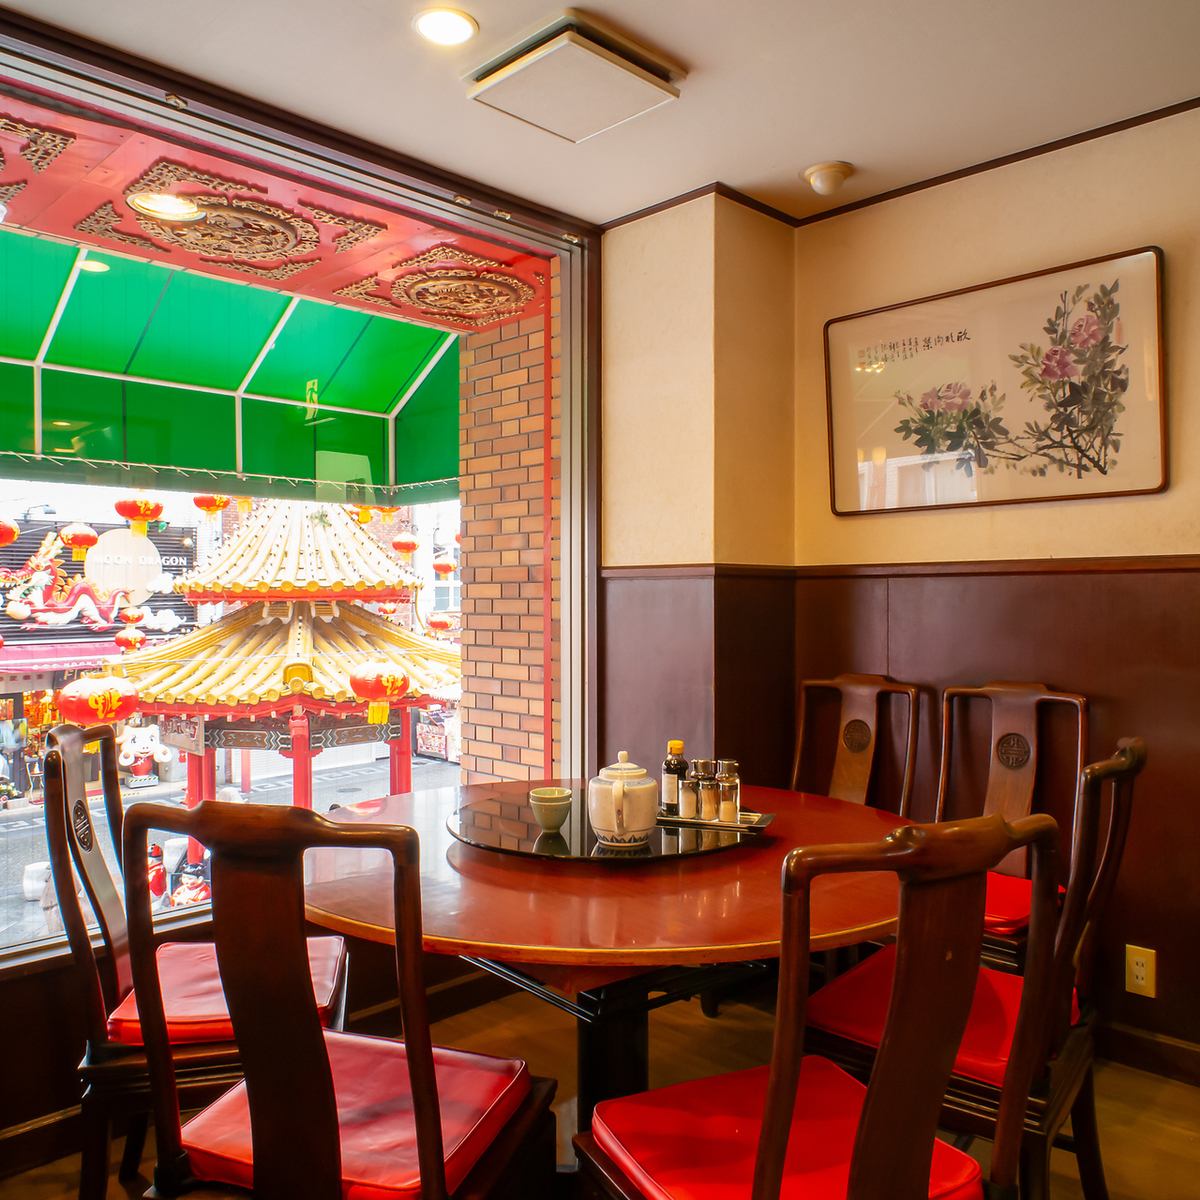 Enjoy a luxurious time with authentic Chinese food!Round table seating is also available♪